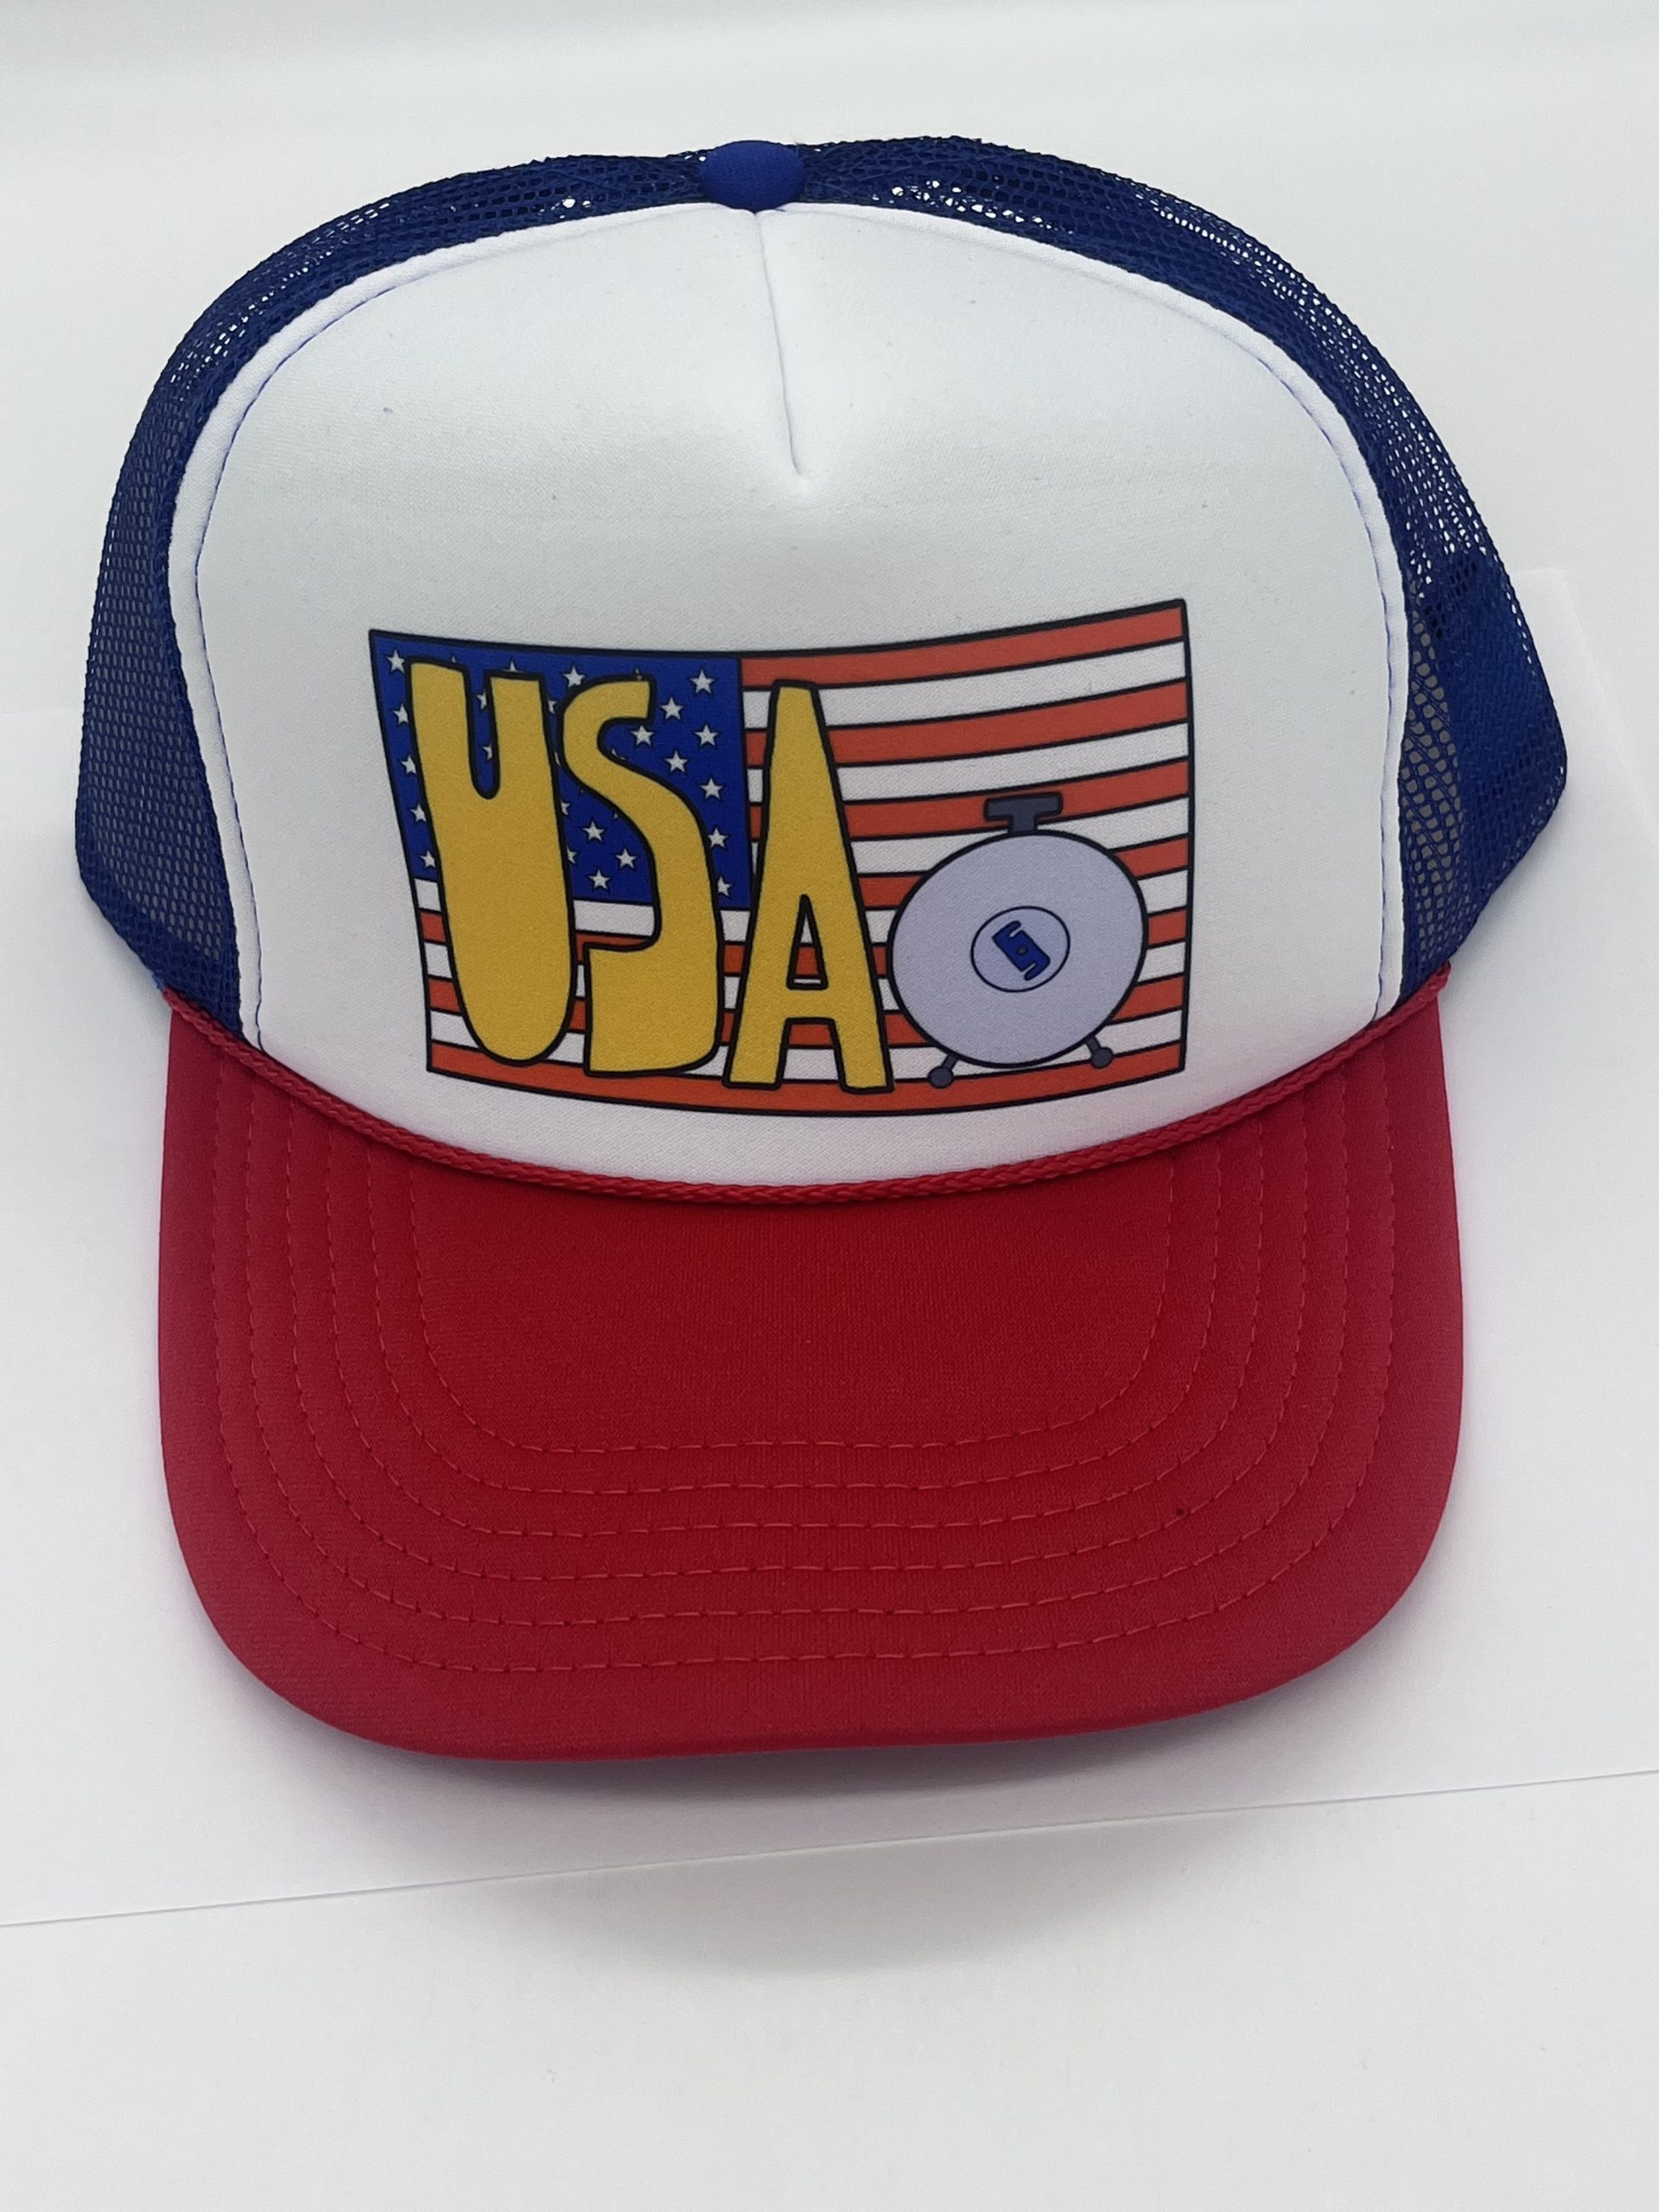 Made in the USA -bright blue trucker hat with red bill - Associated ...